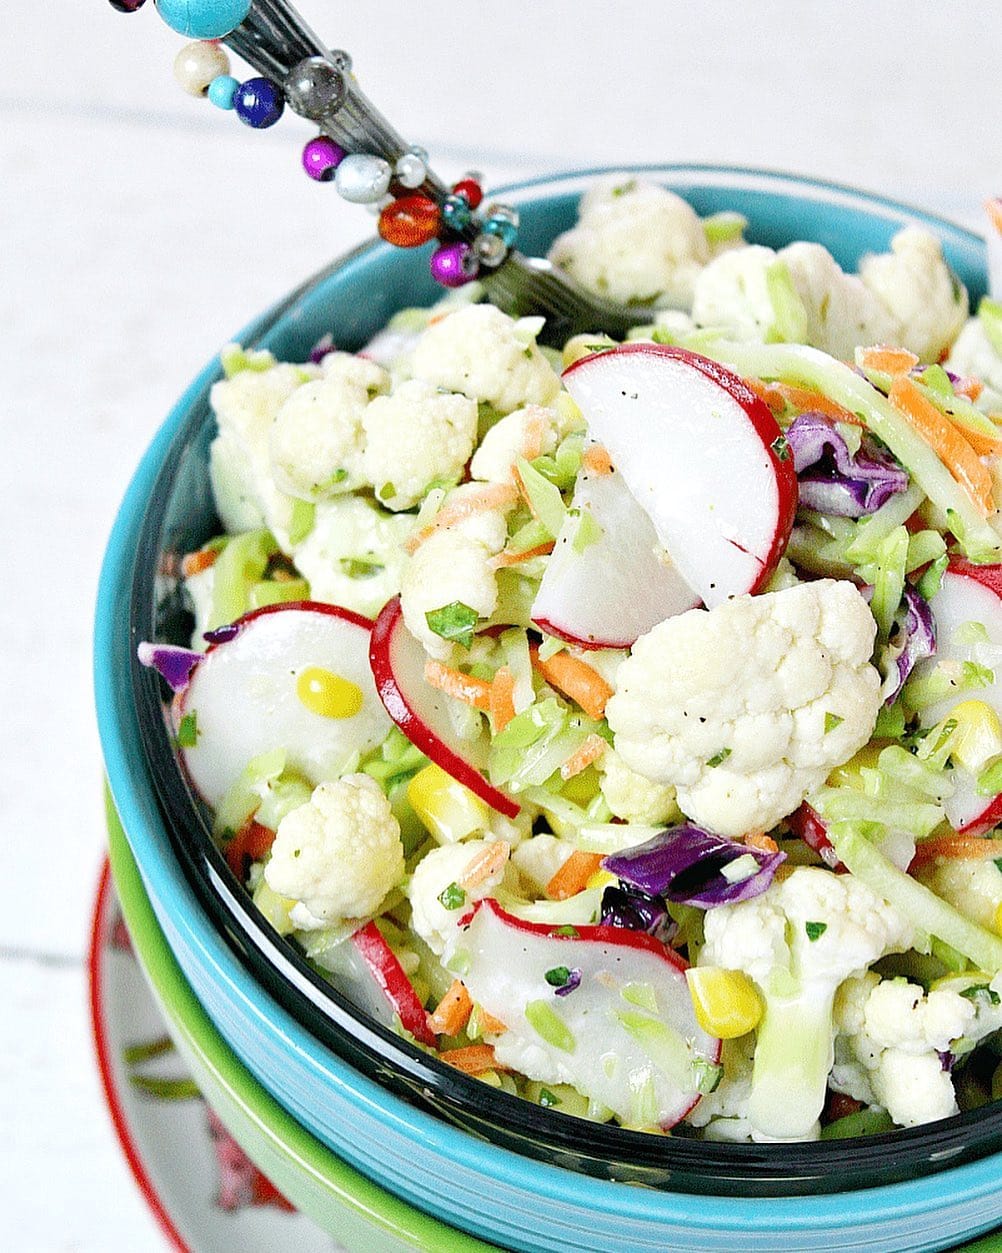 Healthy Cauliflower & Broccoli Slaw Salad {GF & DF}

I am craving all the colors of spring this week.🌈

And this salad has spring and Easter written all over it!💐

◻️Here is what you need!◻️

Salad Ingredients
▫️12 oz bag broccoli slaw
▫️1 cup frozen corn
▫️6 radishes
▫️5 cups or 1 small cauliflower

Dressing Ingredients
▫️fresh basil leaves
▫️lemon juice
▫️red wine vinegar
▫️mayo
▫️sea salt
▫️black pepper

❗️TIP❗️The flavors are usually perfect after a couple hours, but you can eat this salad 3-4 days later and it tastes just as delicious. There is no lack of flavor or texture. Woot woot! Where my meal preppers at?!💁🏻‍♀️

👉🏼FULL instructions in the link @happihomemade!📲 ⁣

💕Let’s stay connected! Follow ➡️ @happihomemade 

🍴Save this easy recipe to make this spring!🐣